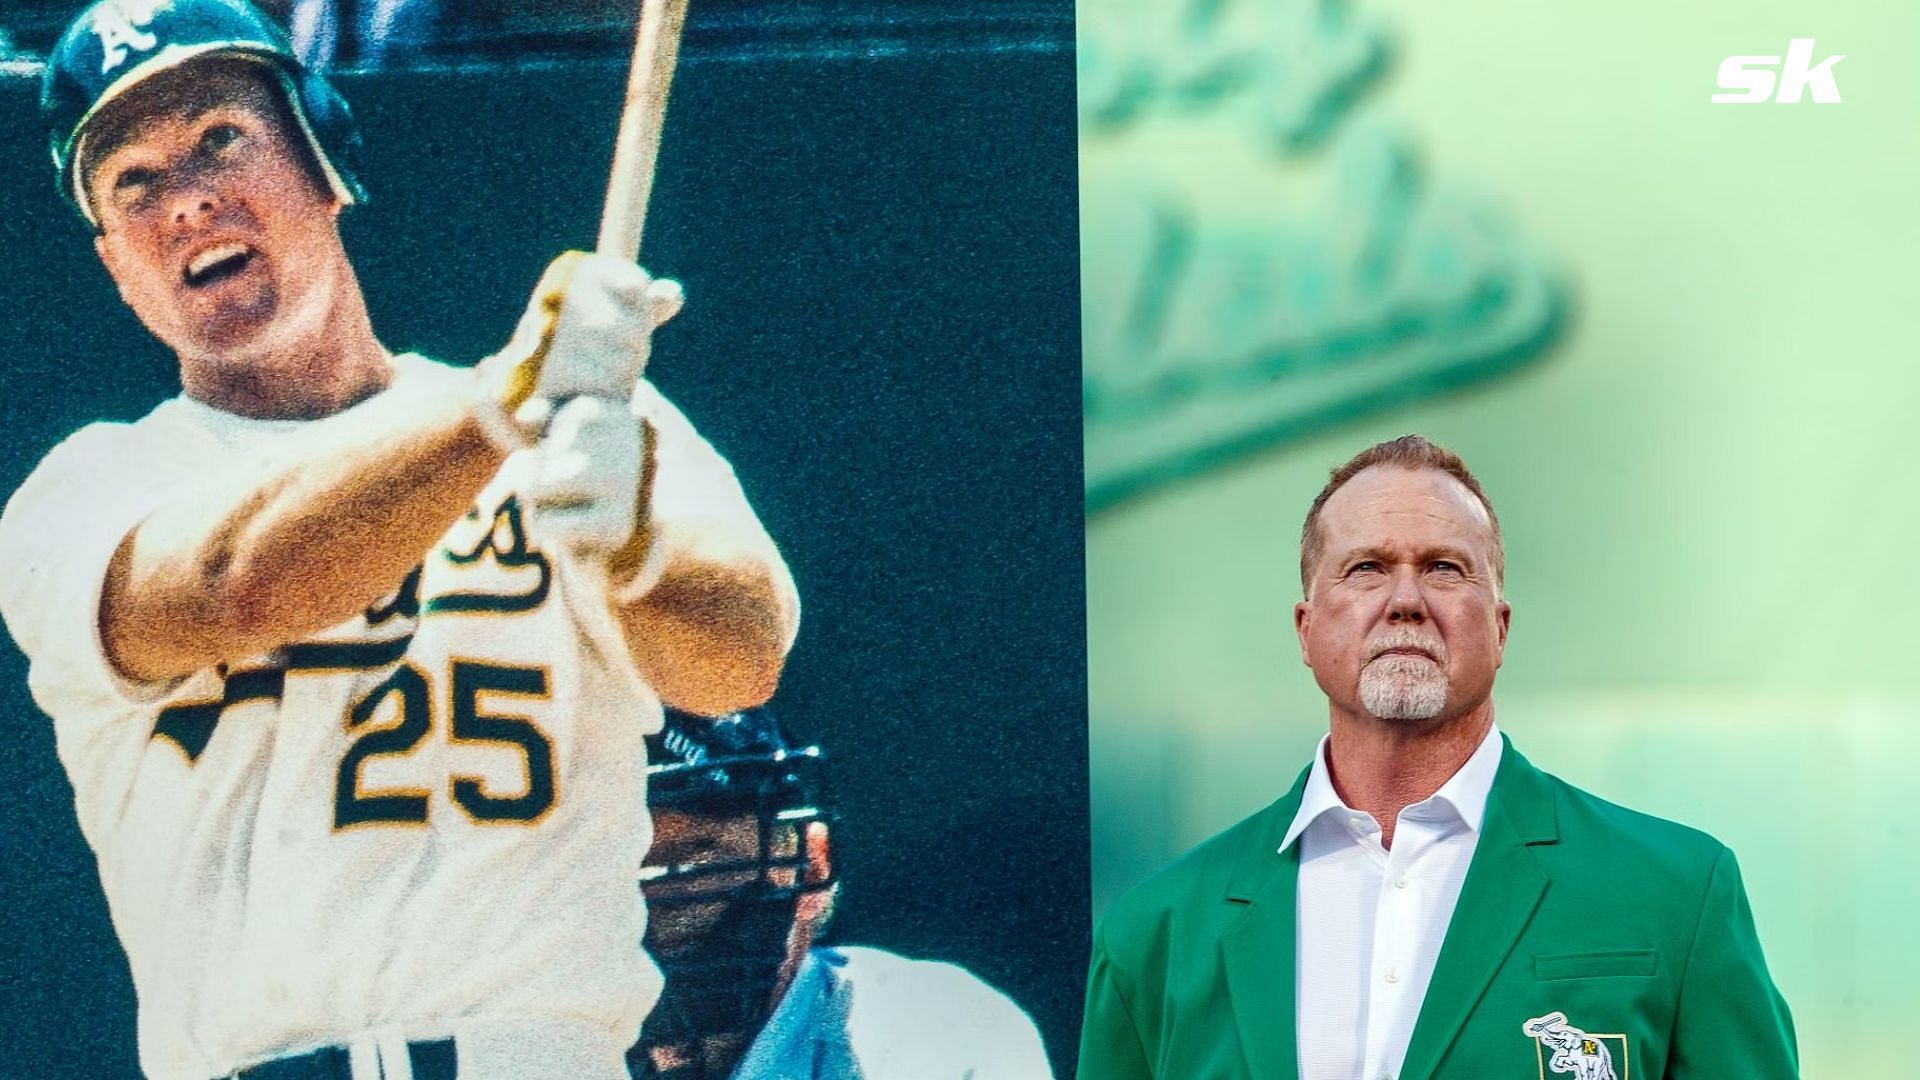 MLB fans mock Mark McGwire after an old photo with his bodybuilder